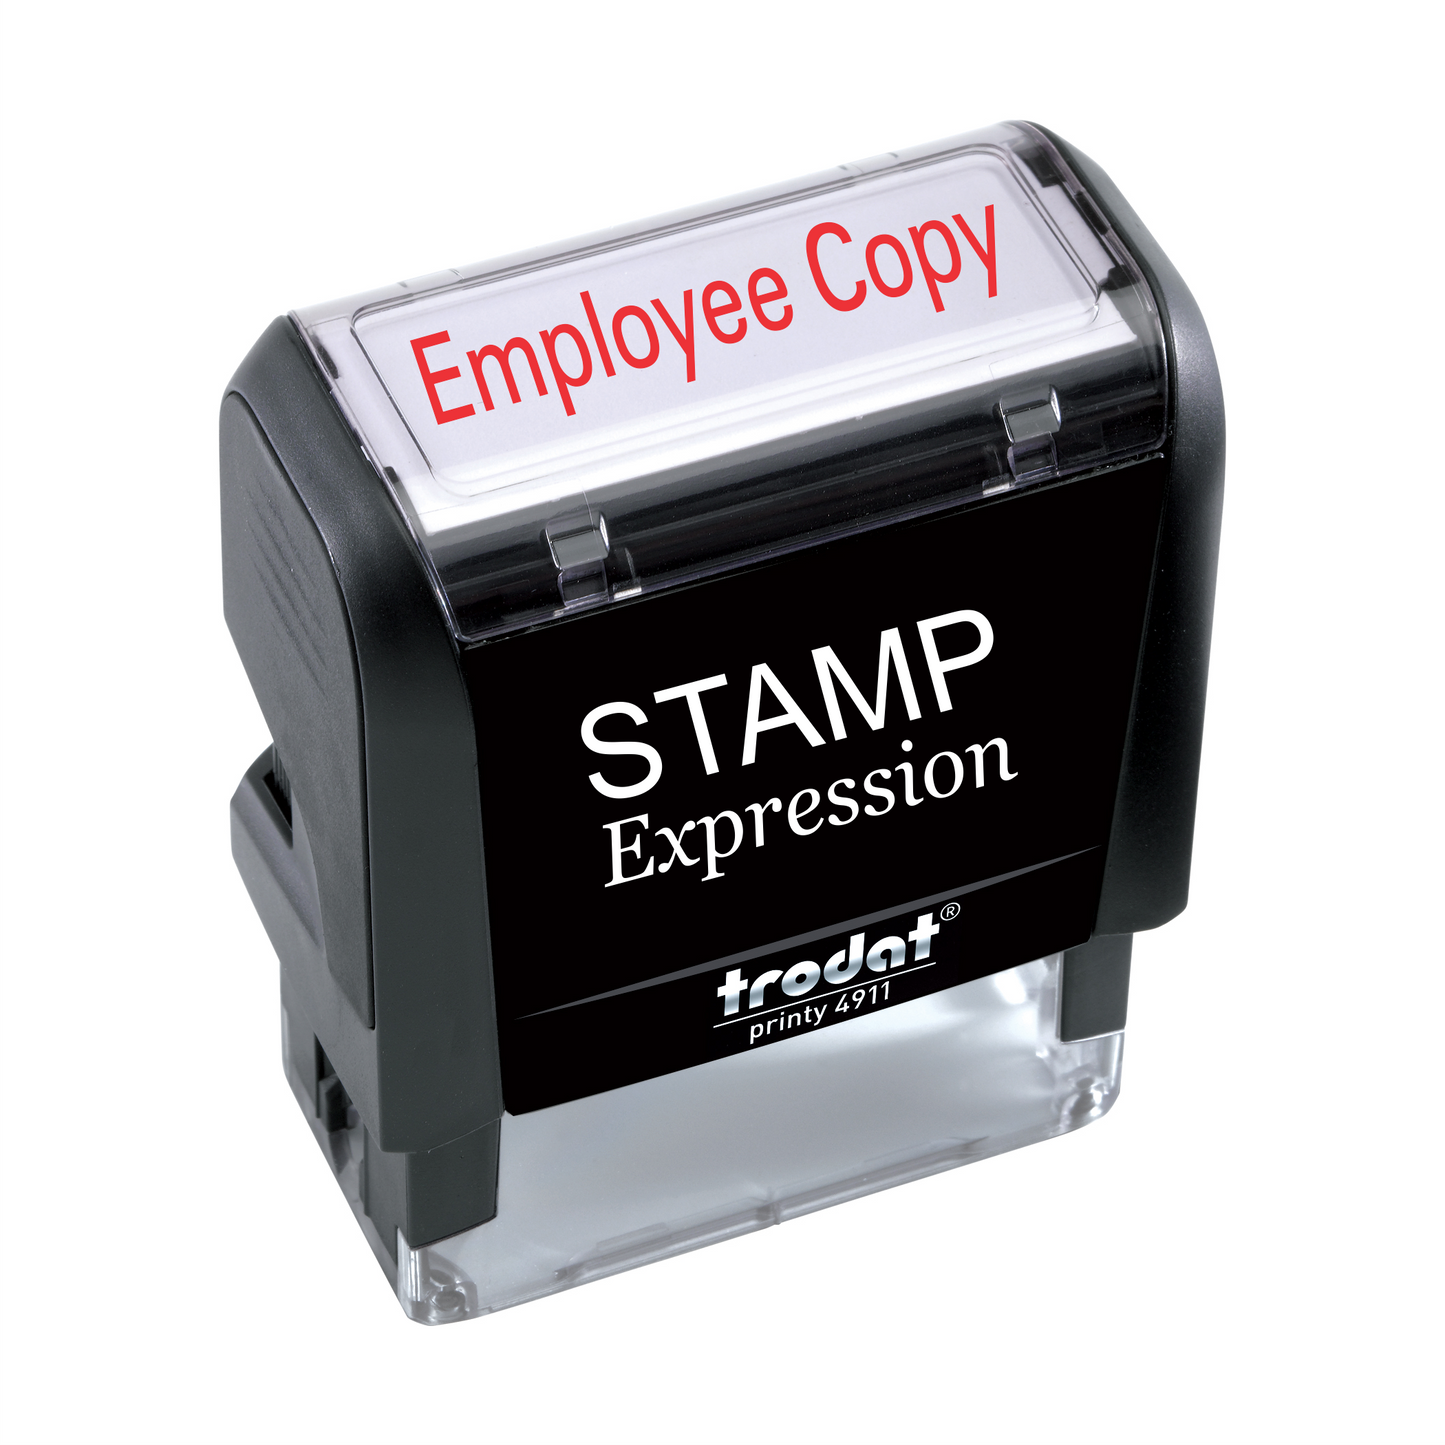 Employee Copy Office Self Inking Rubber Stamp (SH-5285)